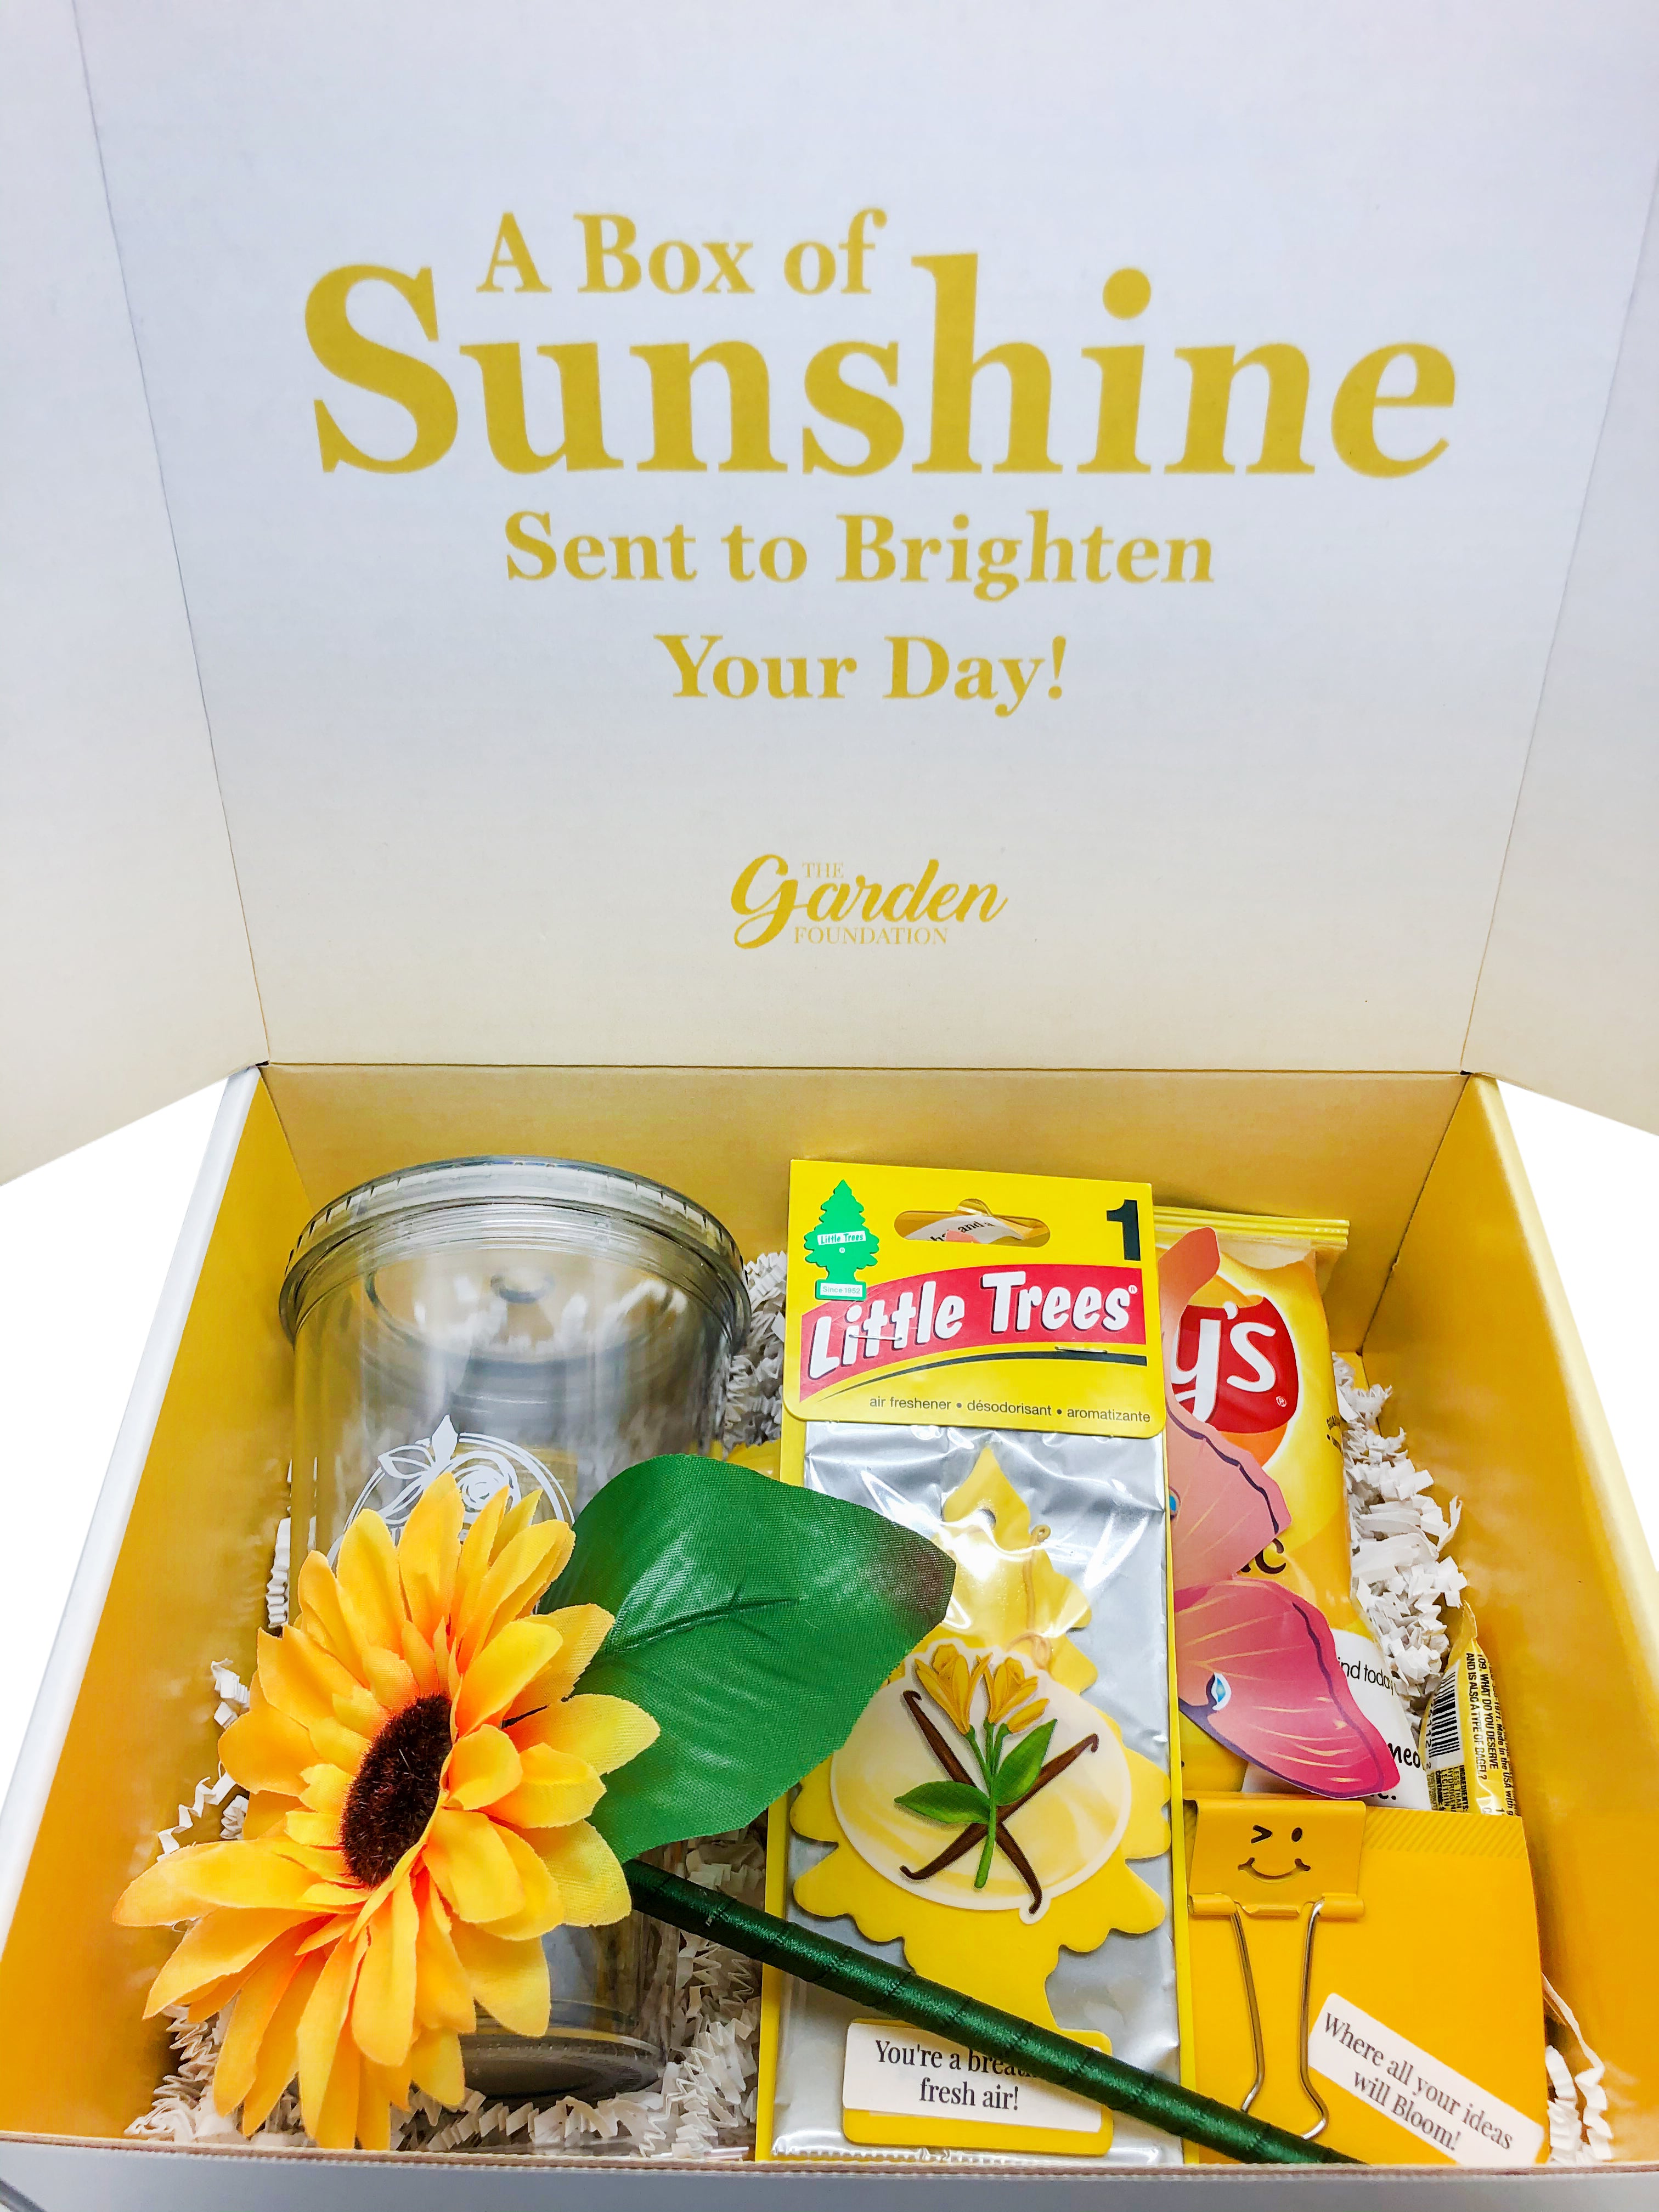 Buy Box of Sunshine Snacks Yellow Gift Box Sunshine Box Snack Care Package  Summer Gifts Basket Sending You Sunshine Brighten Your Day Online in India  - Etsy